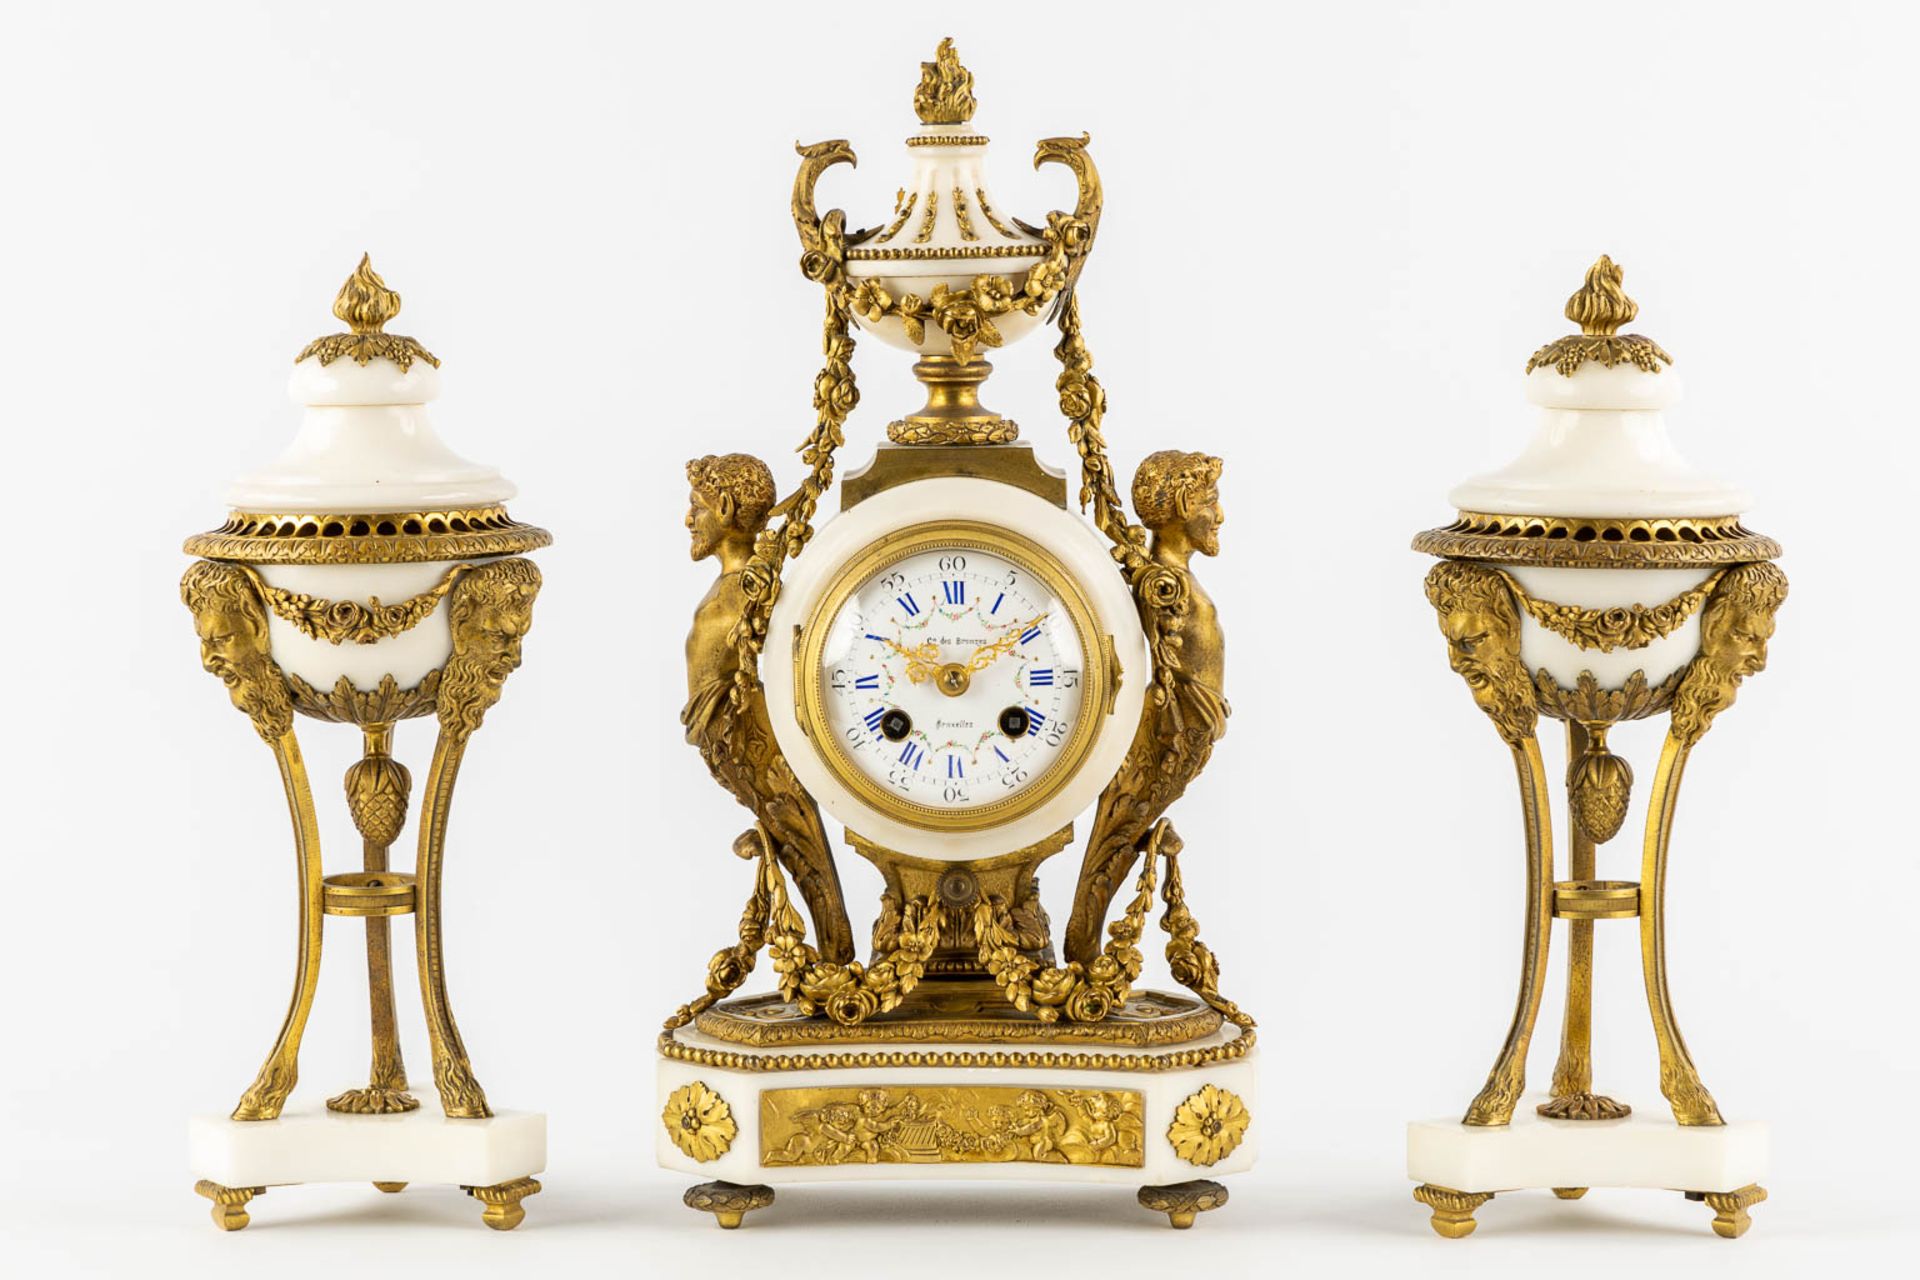 A three-piece mantle garniture clock and cassolettes, Carrara marble mounted with bronze, Louis XVI 